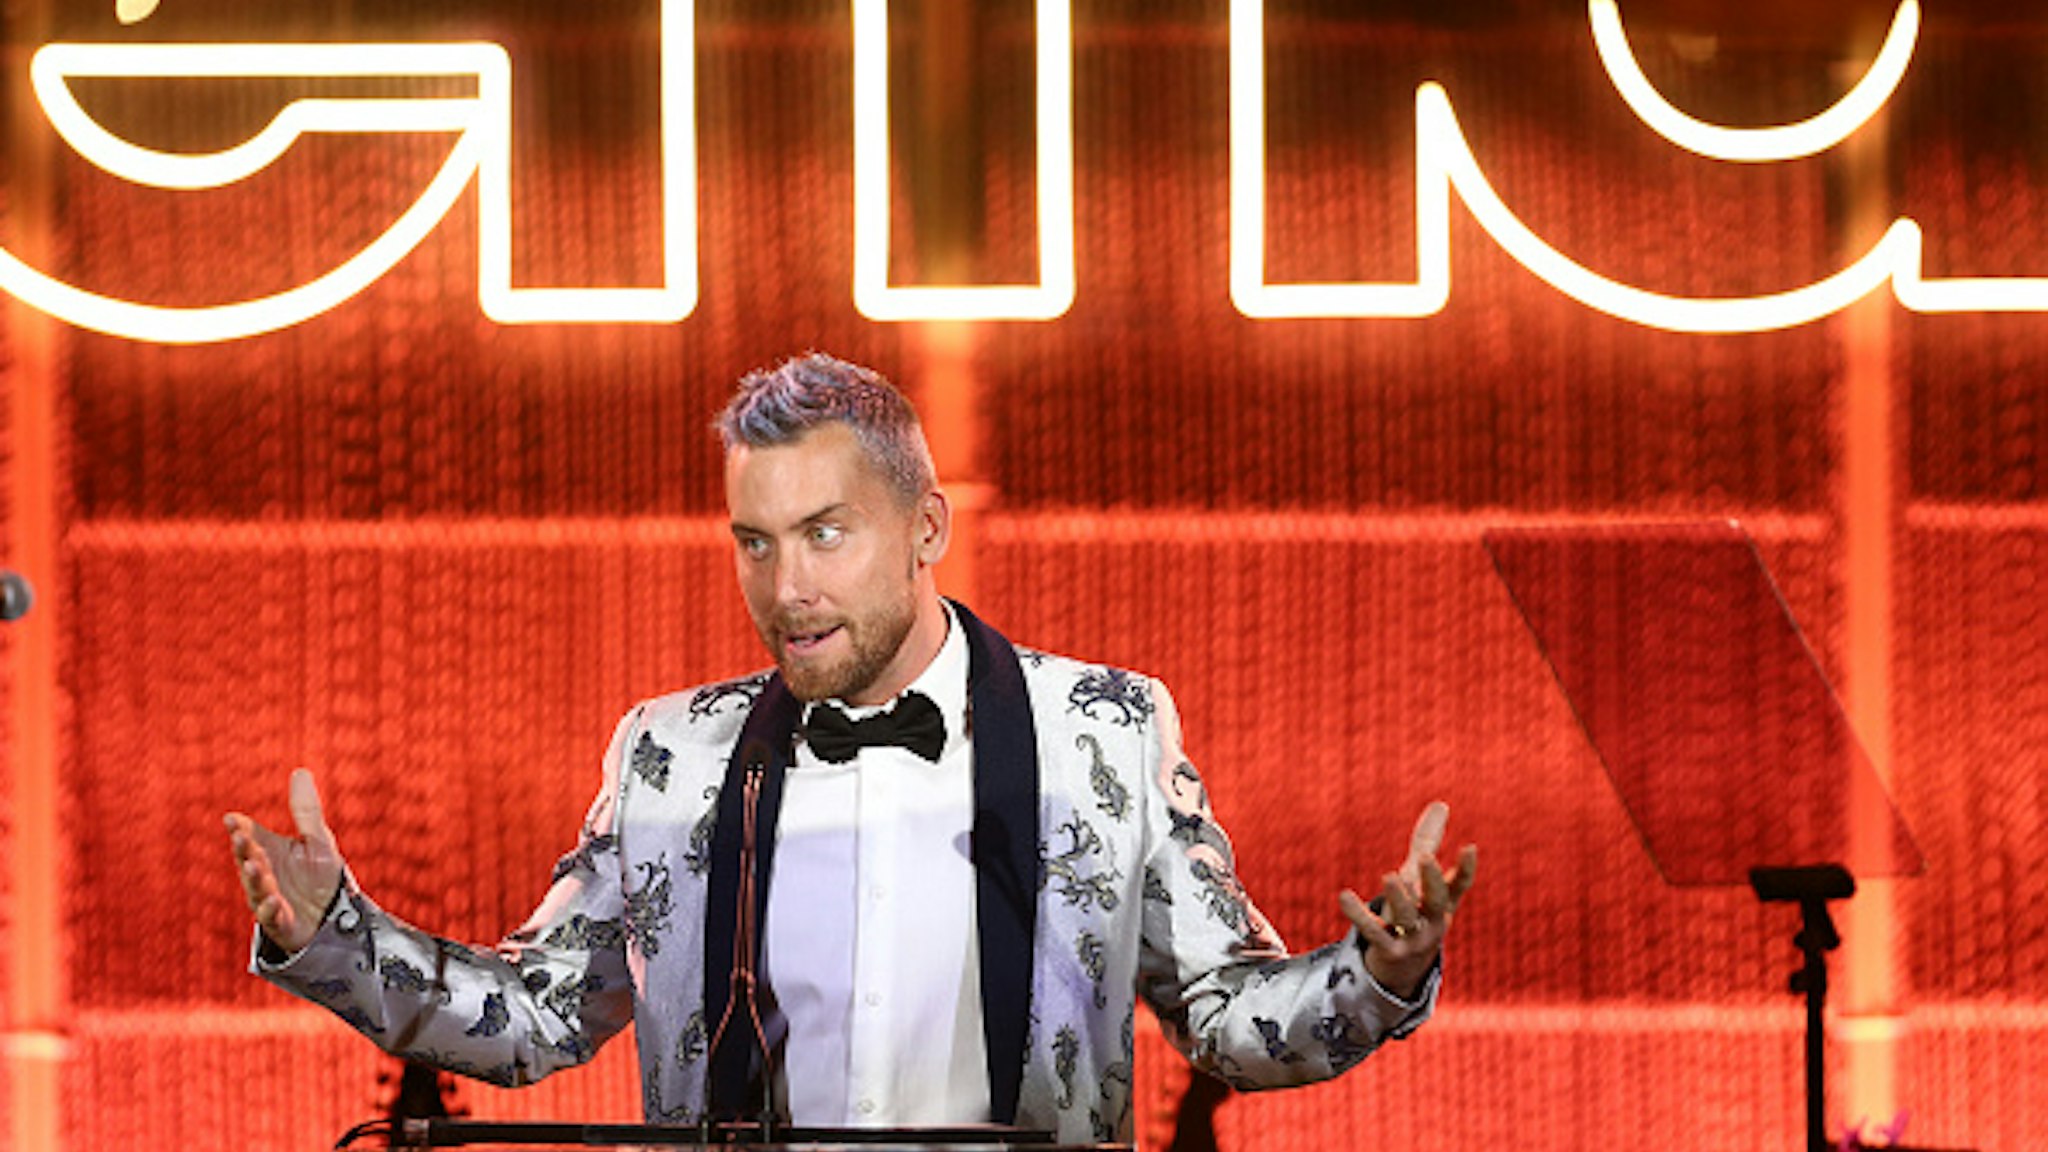 PACIFIC PALISADES, CALIFORNIA - SEPTEMBER 28: Lance Bass speaks onstage during the Environmental Media Association 2nd Annual Honors Benefit Gala at Private Residence on September 28, 2019 in Pacific Palisades, California.